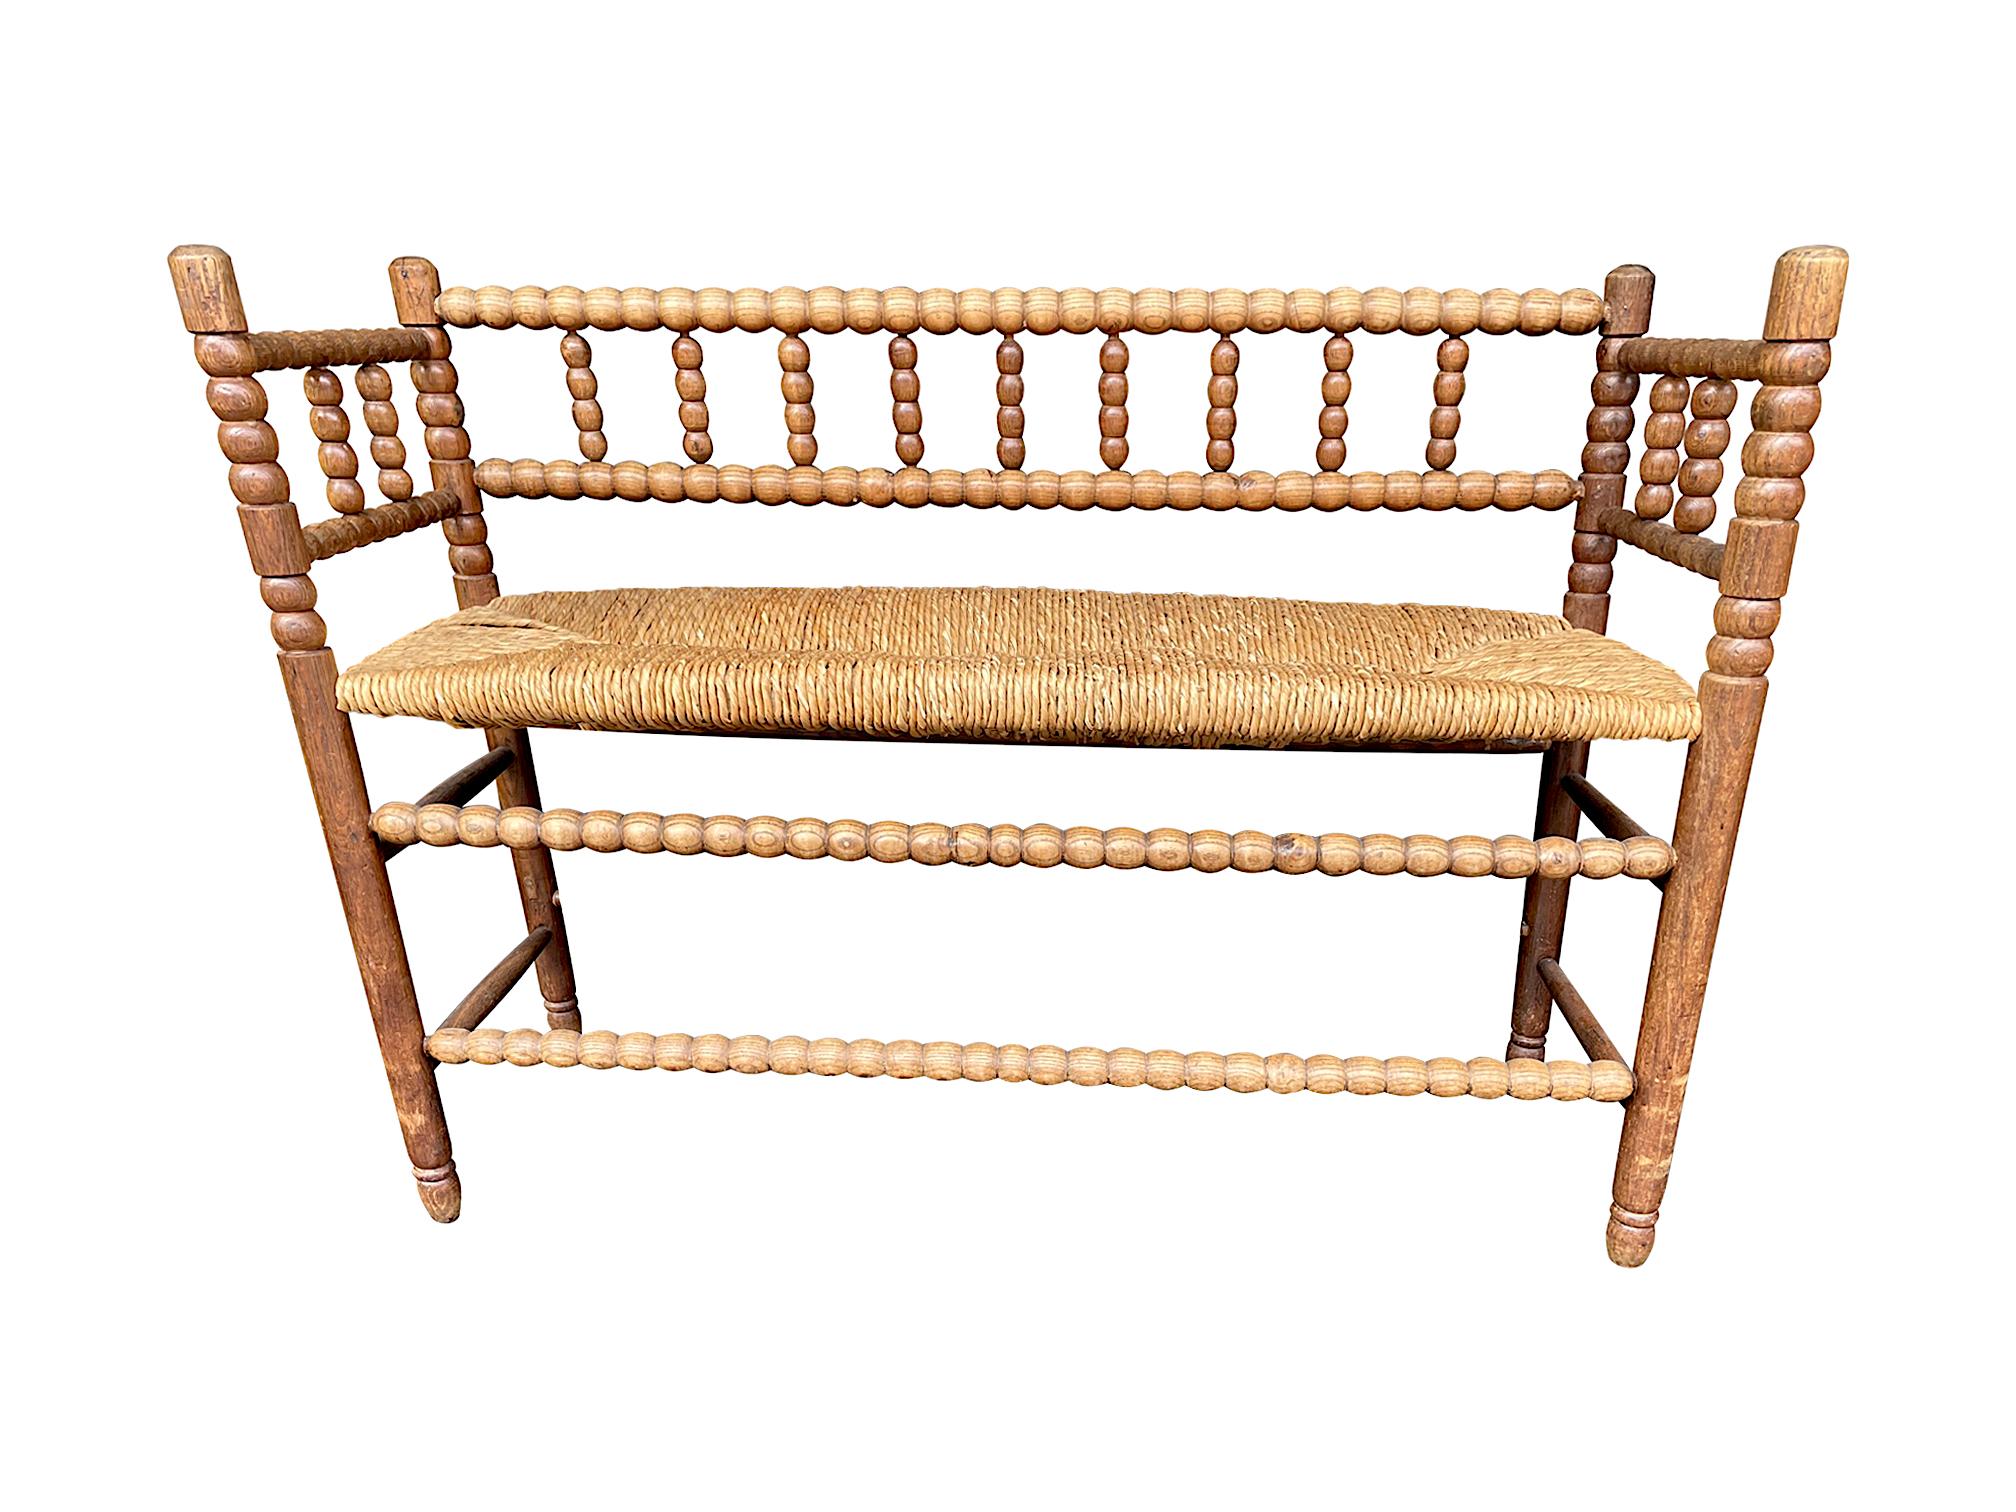 A lovely 1890s English oak and elm bobbin bench seat with original rush woven seat with lovely patina and grain and in good structural condition.